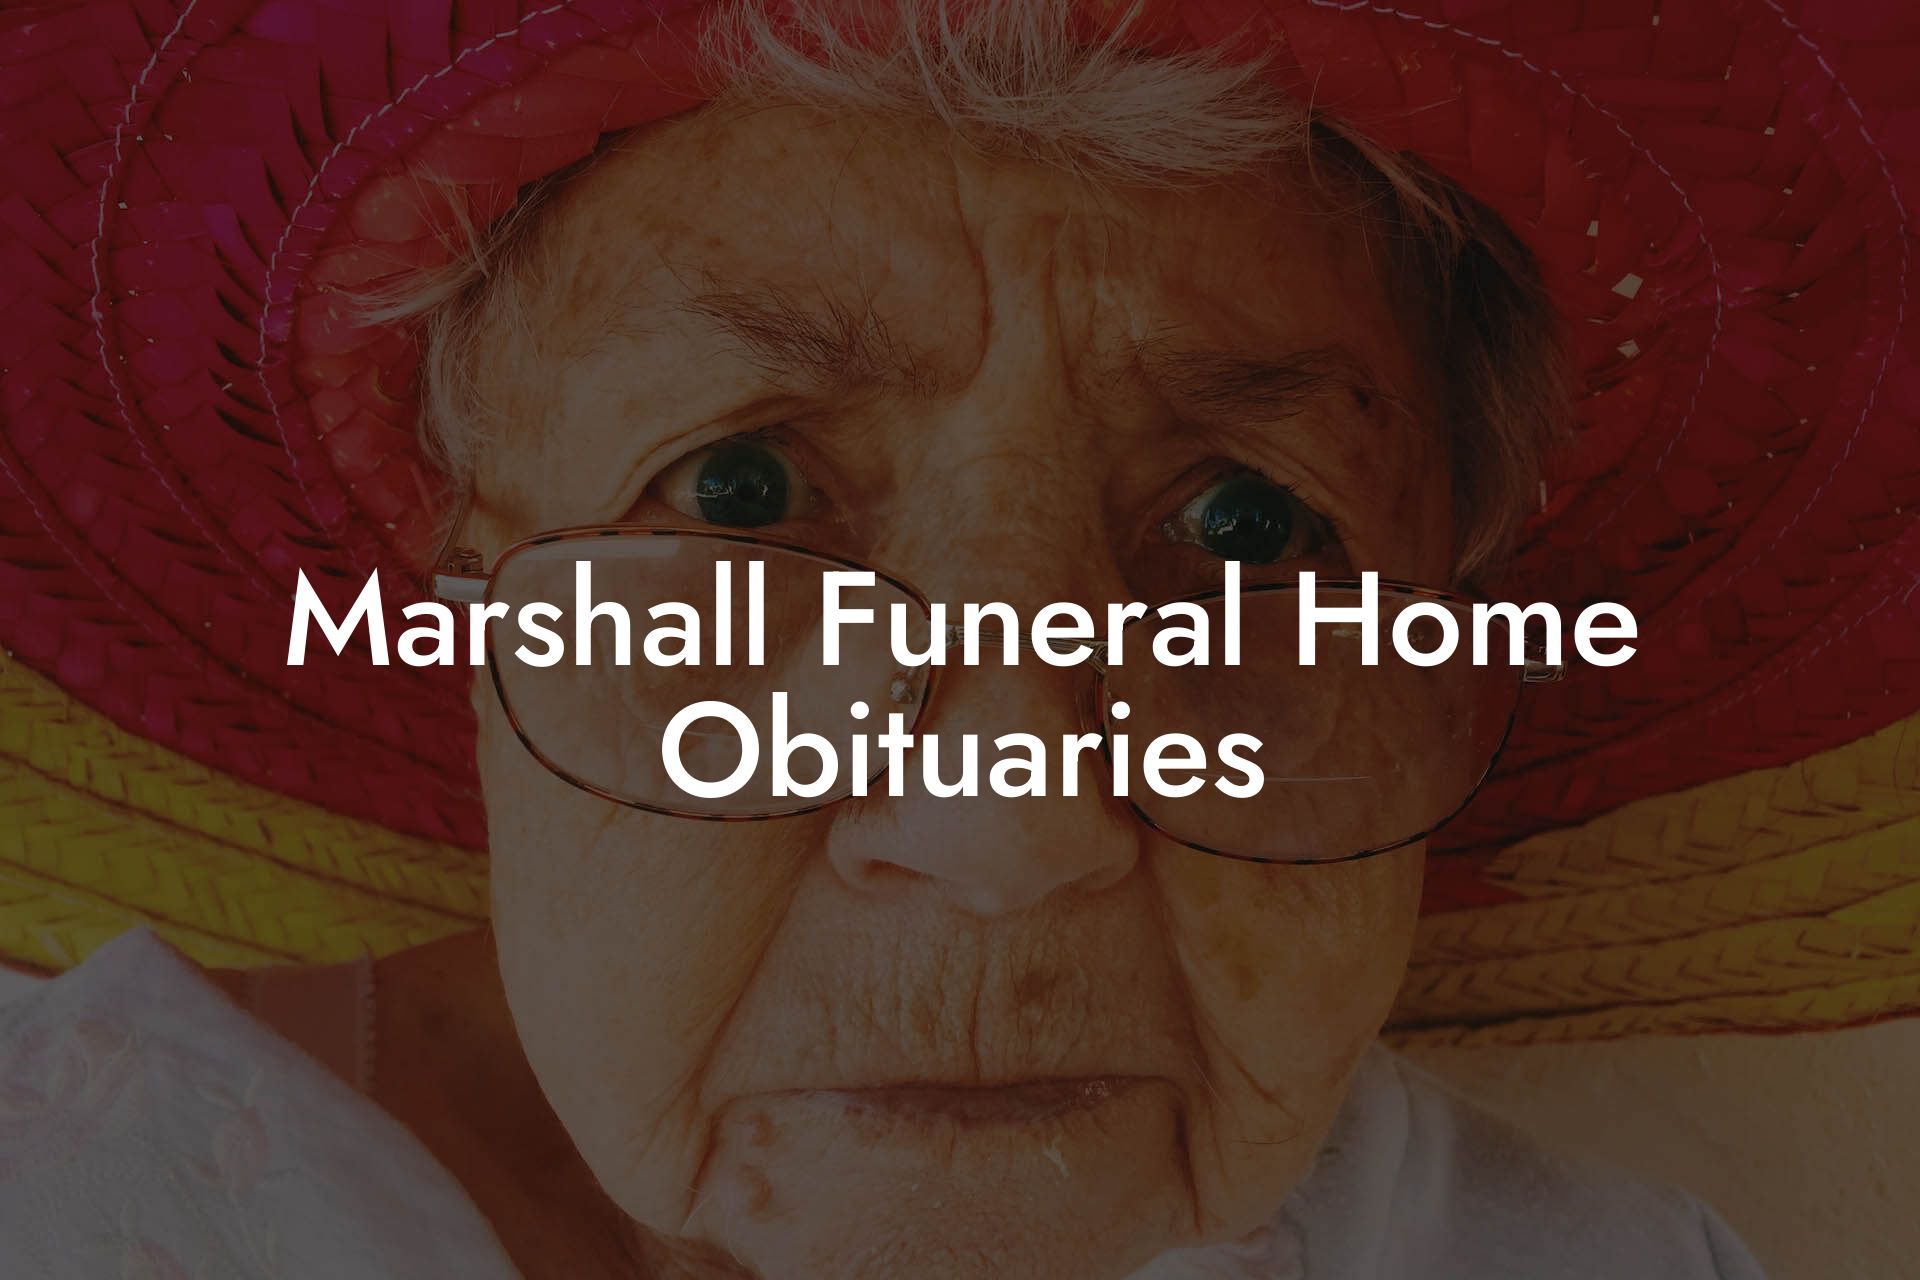 Marshall Funeral Home Obituaries